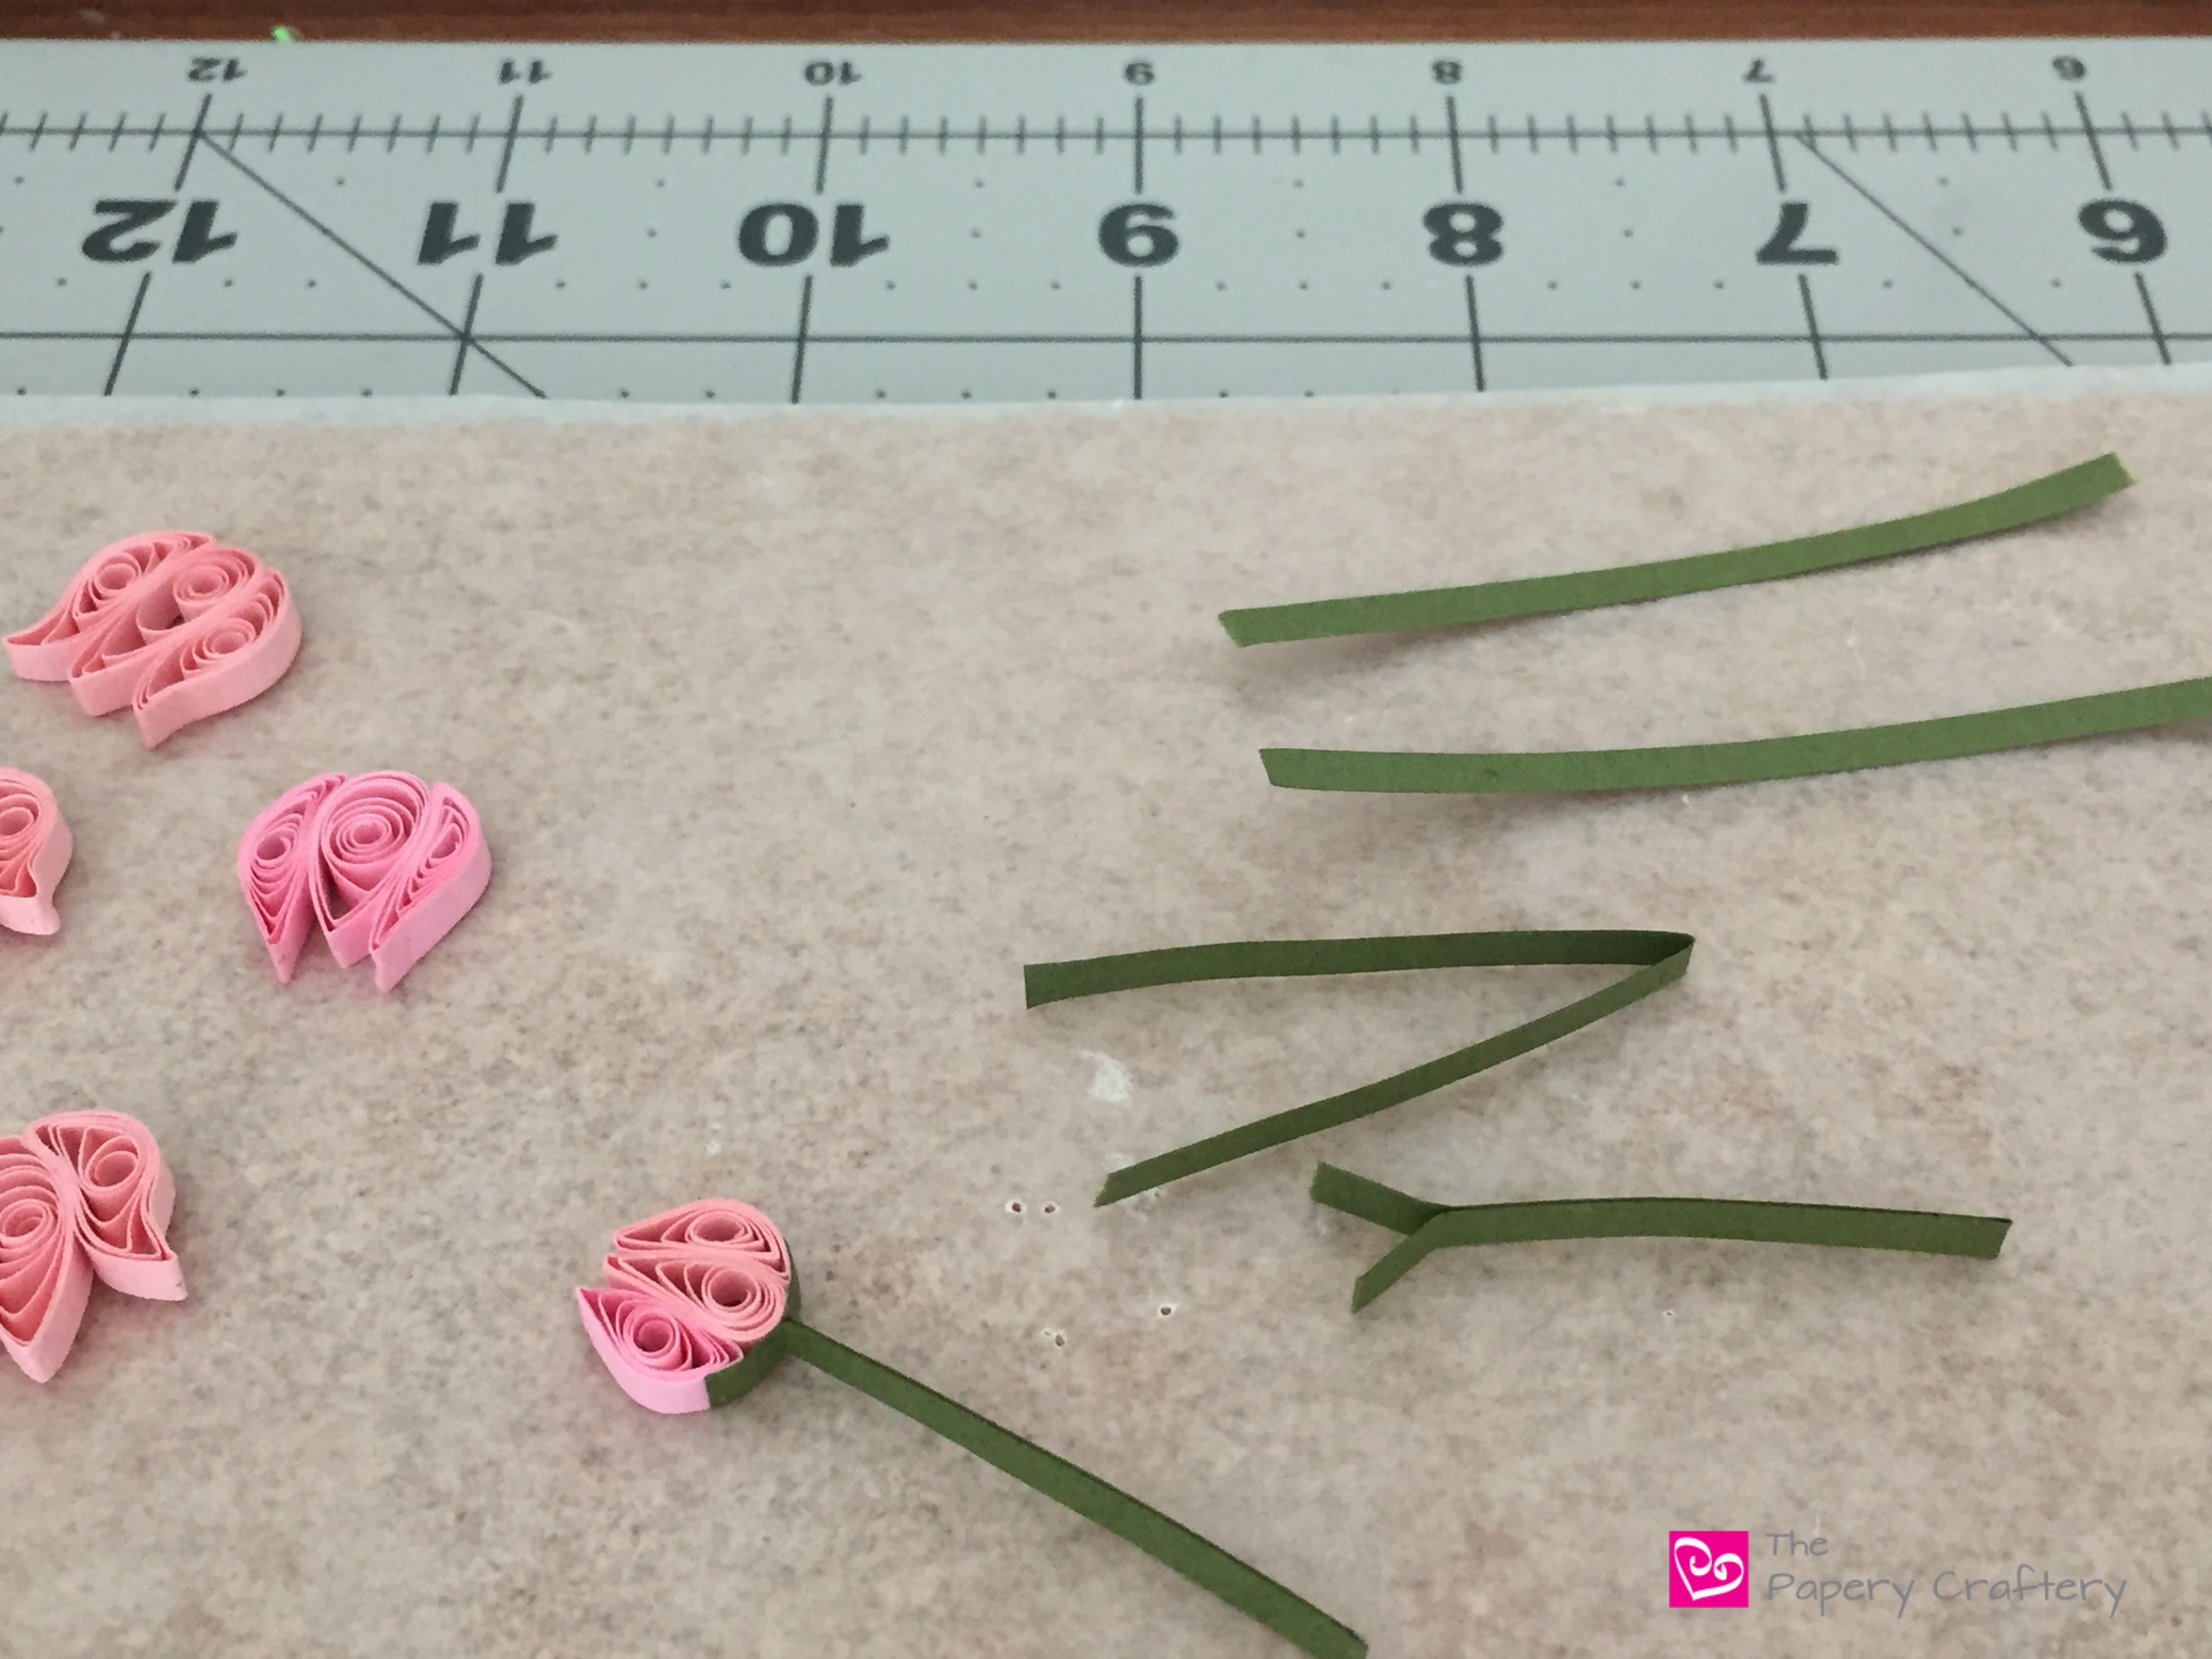 How to Make 3 Quilling Paper Flower Buds - The Papery Craftery